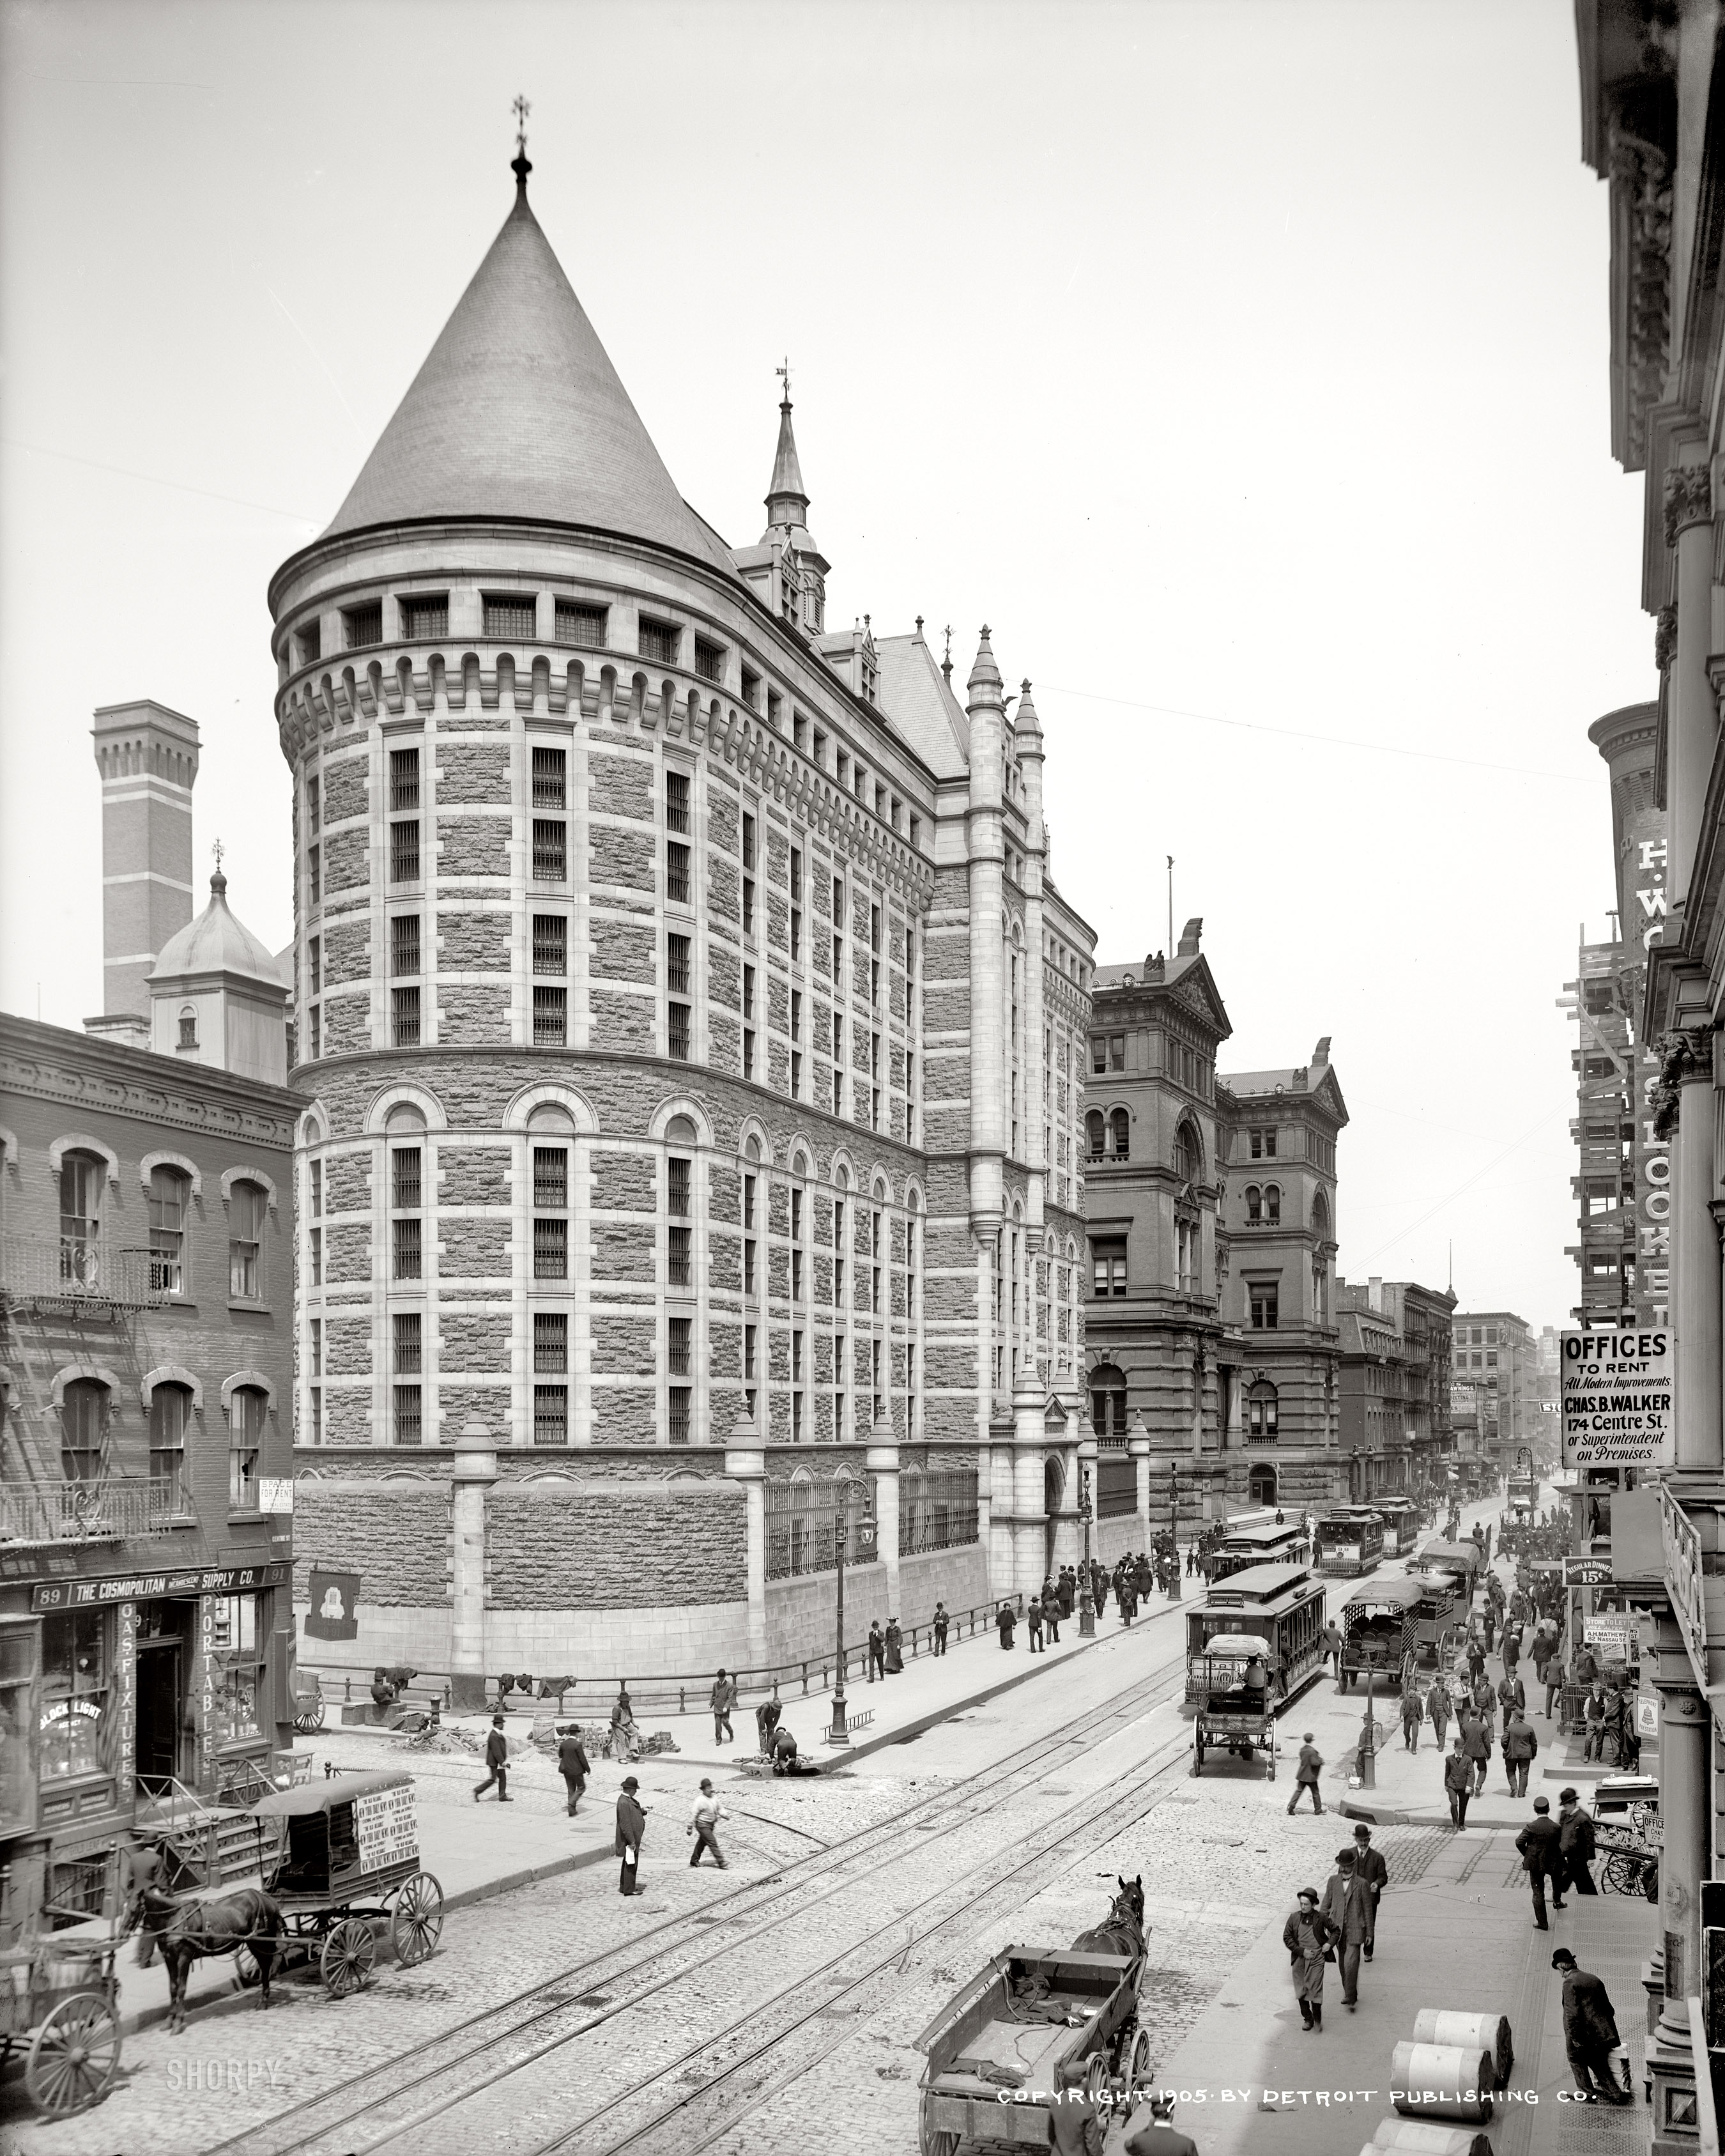 Circa 1905. "Tombs Prison, New York." The view down Centre Street at Leonard Street. What I wouldn't give for five minutes inside Cosmopolitan Incandescent Supply Co. ("Headquarters for Gas Lamps"), or A. Epstein Novelties & Games! 8x10 inch dry plate glass negative, Detroit Publishing Company. View full size.